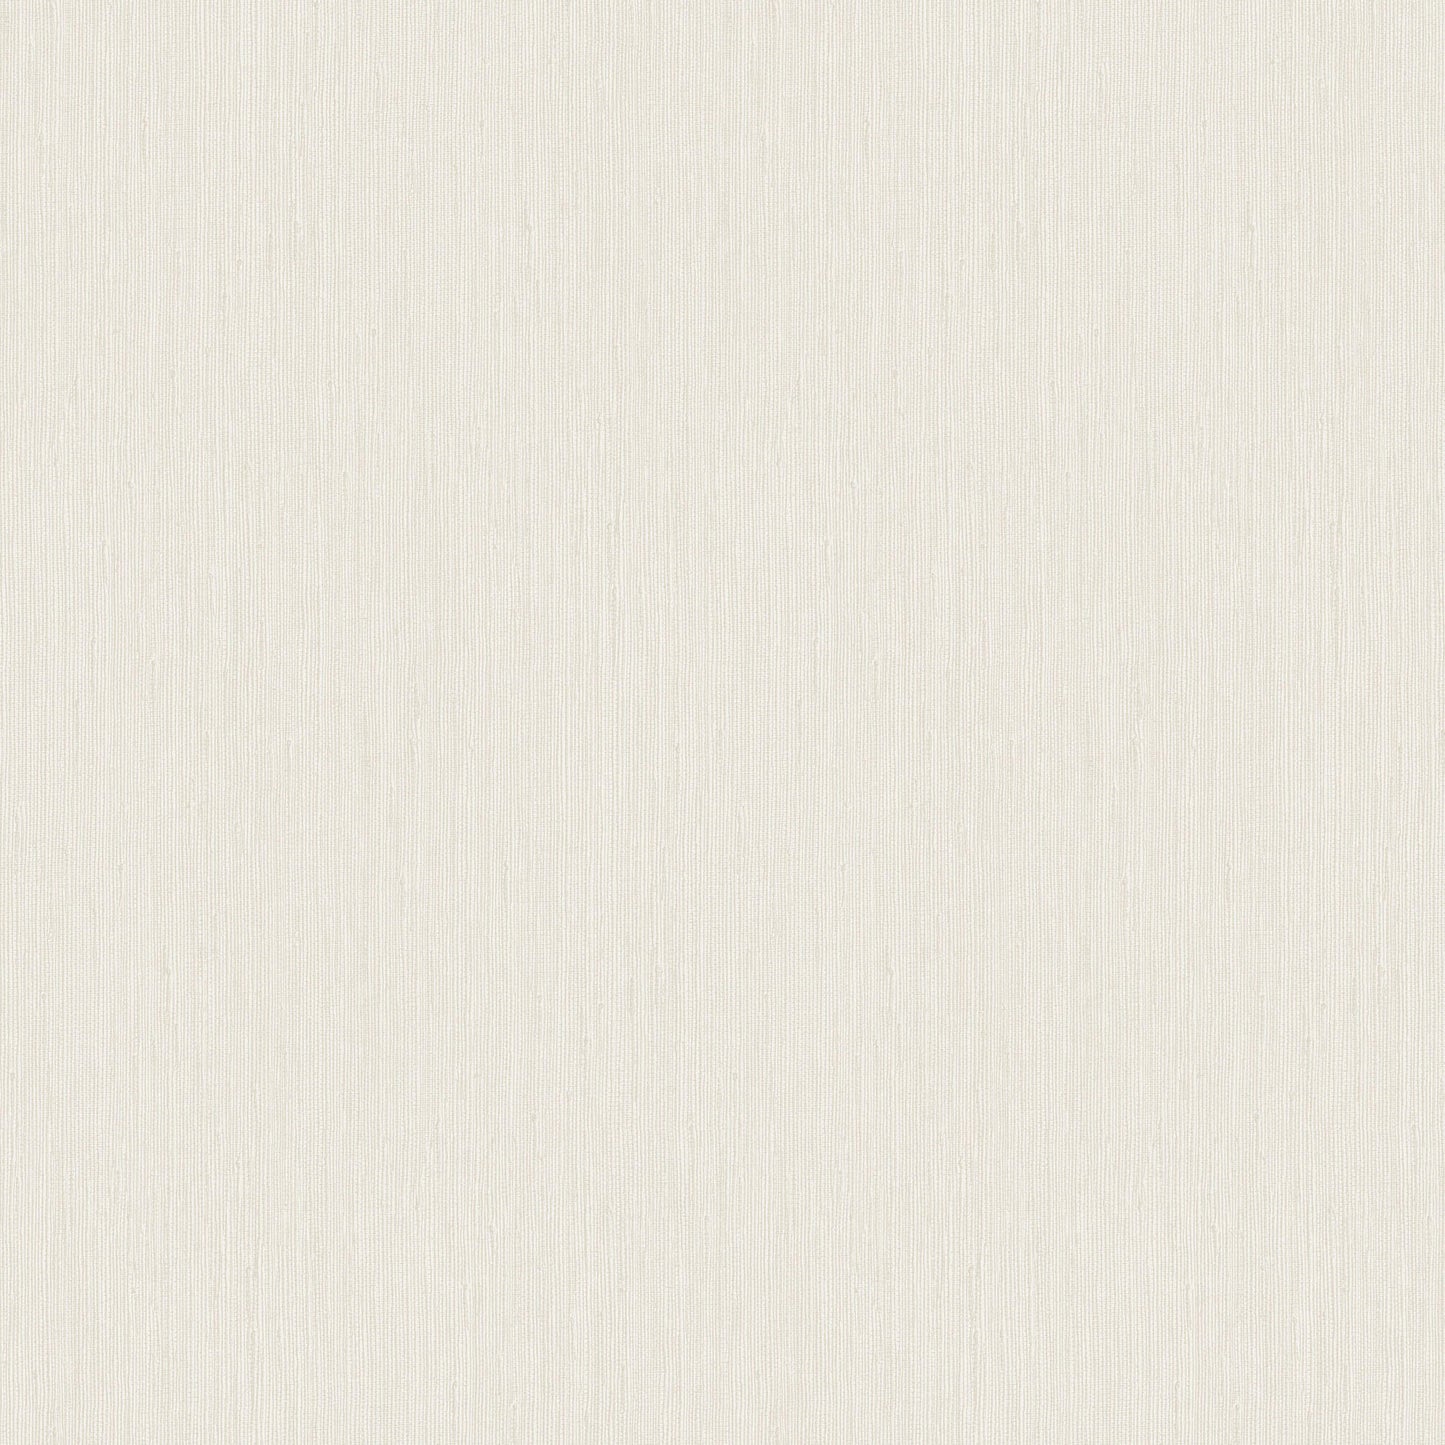 Seagrass Wallpaper - SAMPLE ONLY